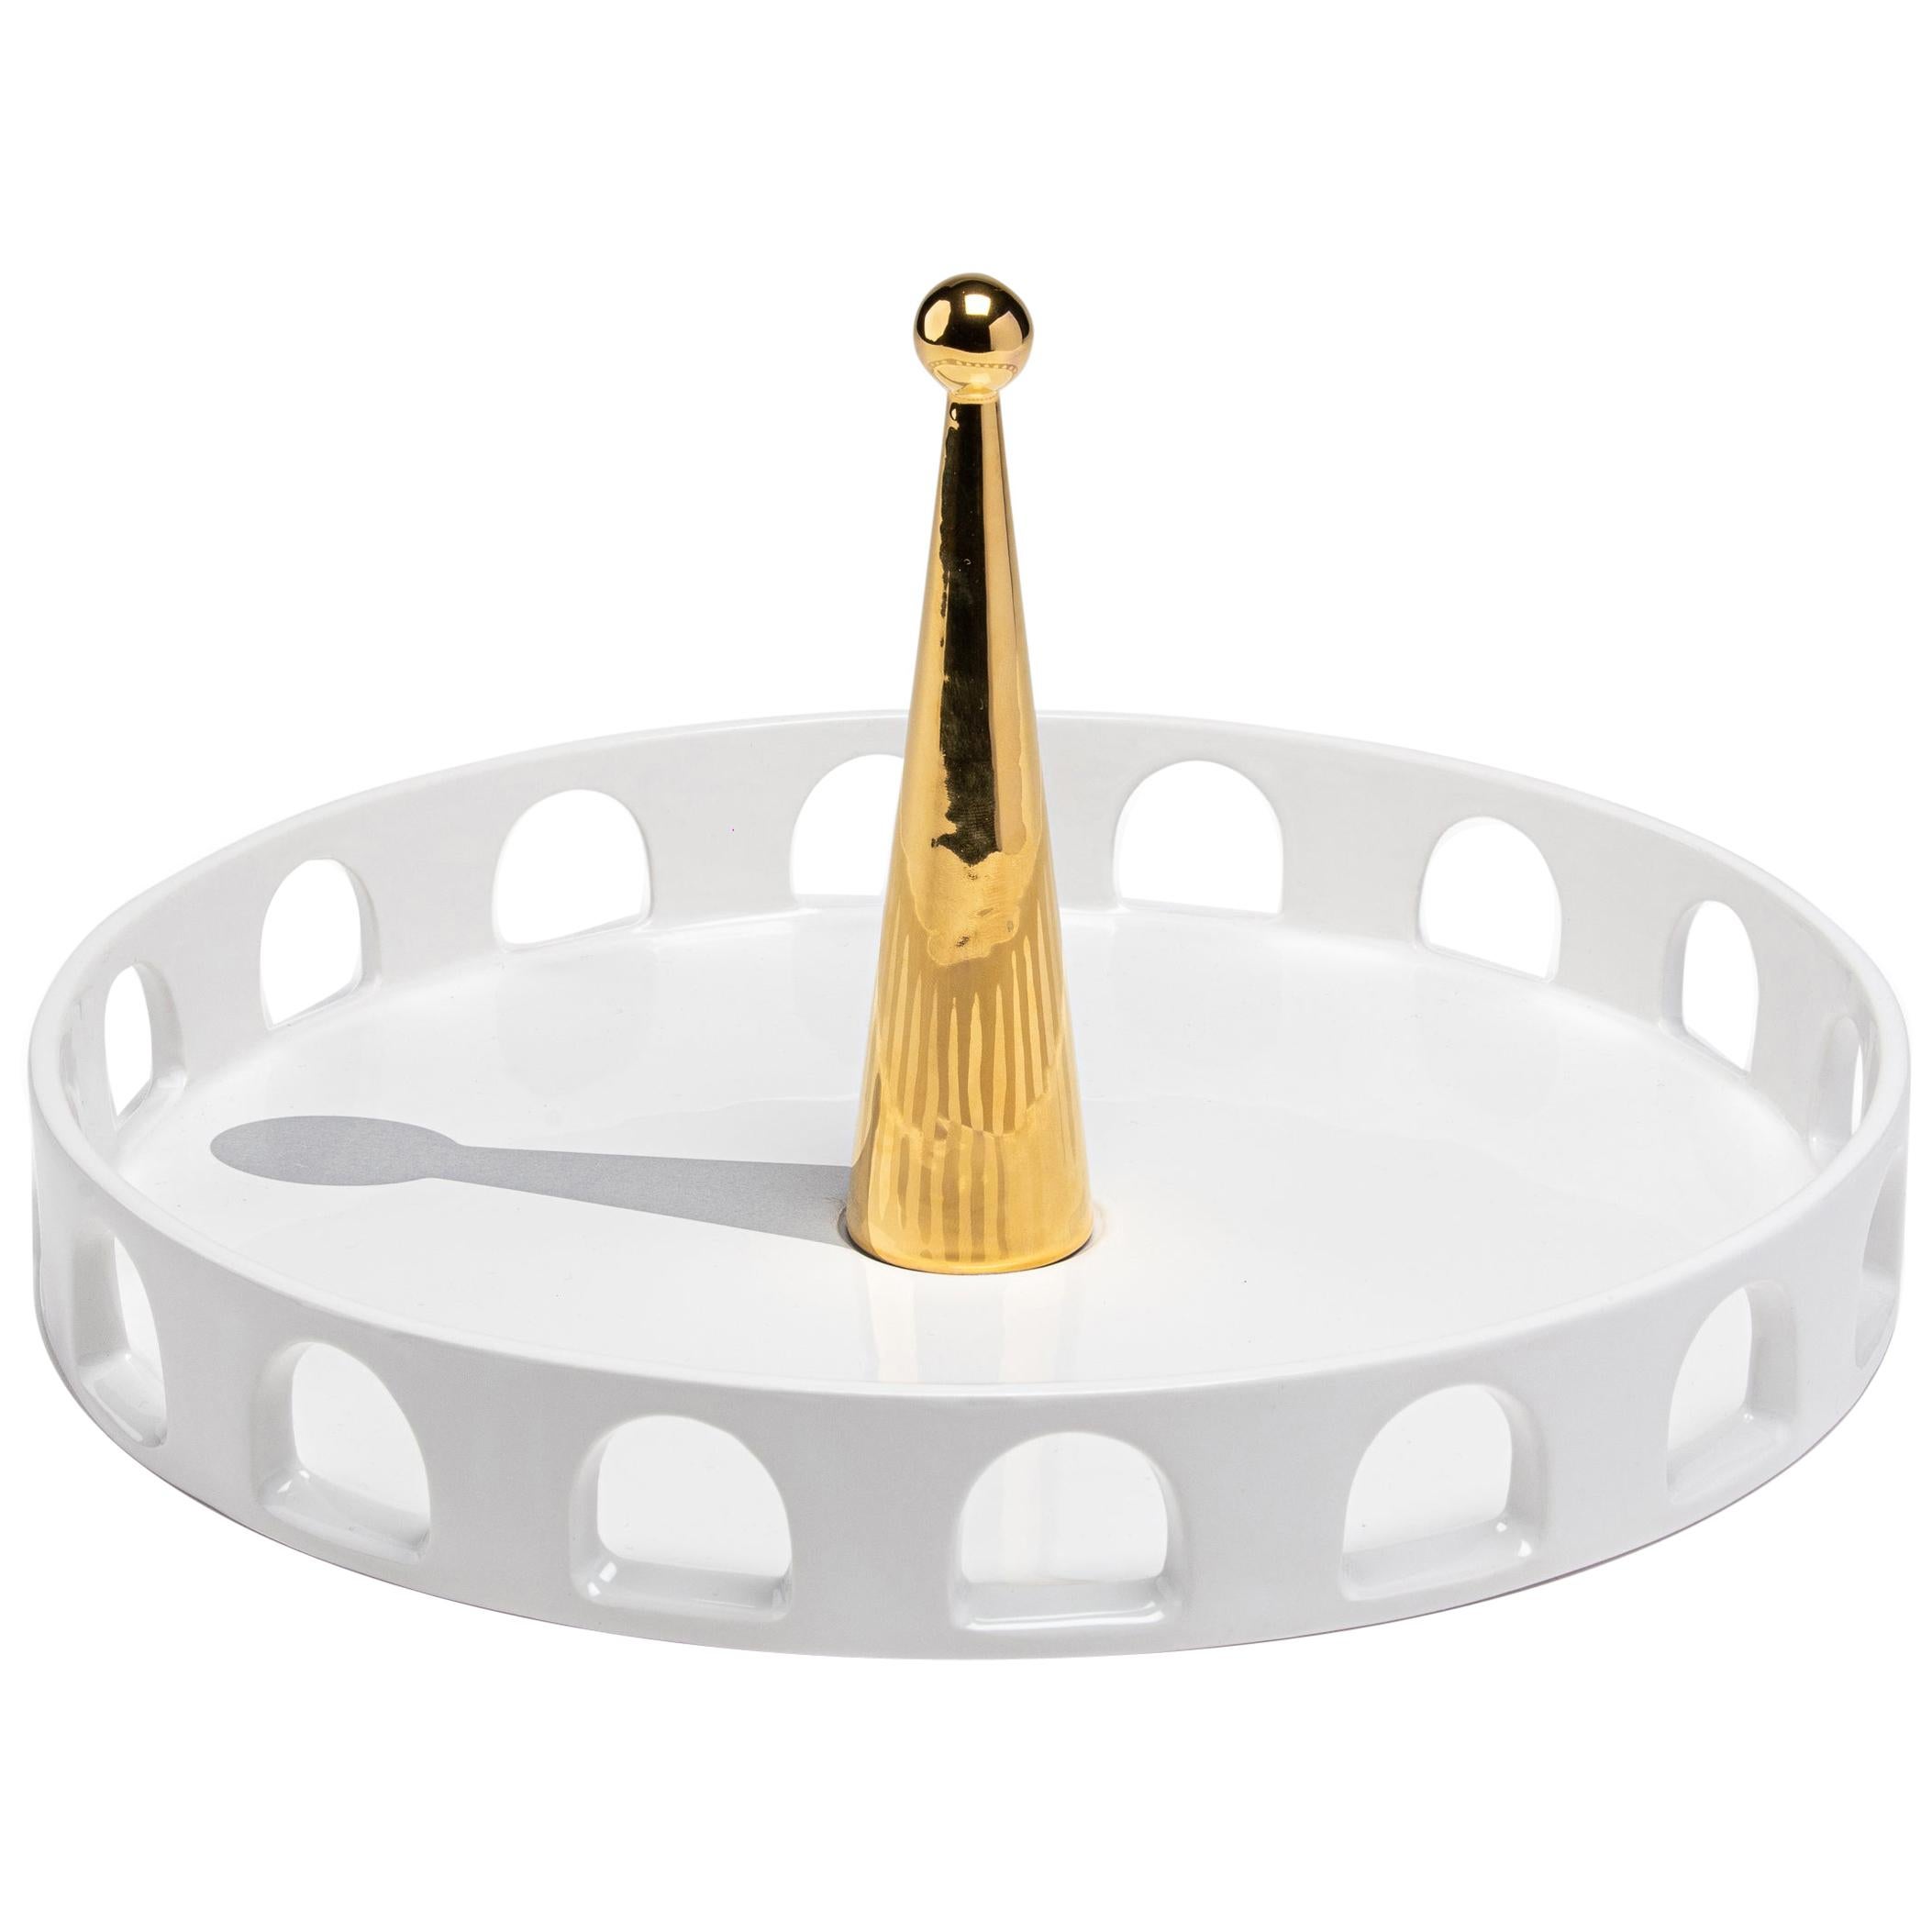 06:45 _ White Ceramic and 24-K Gold Details Handcrafted Round Tray